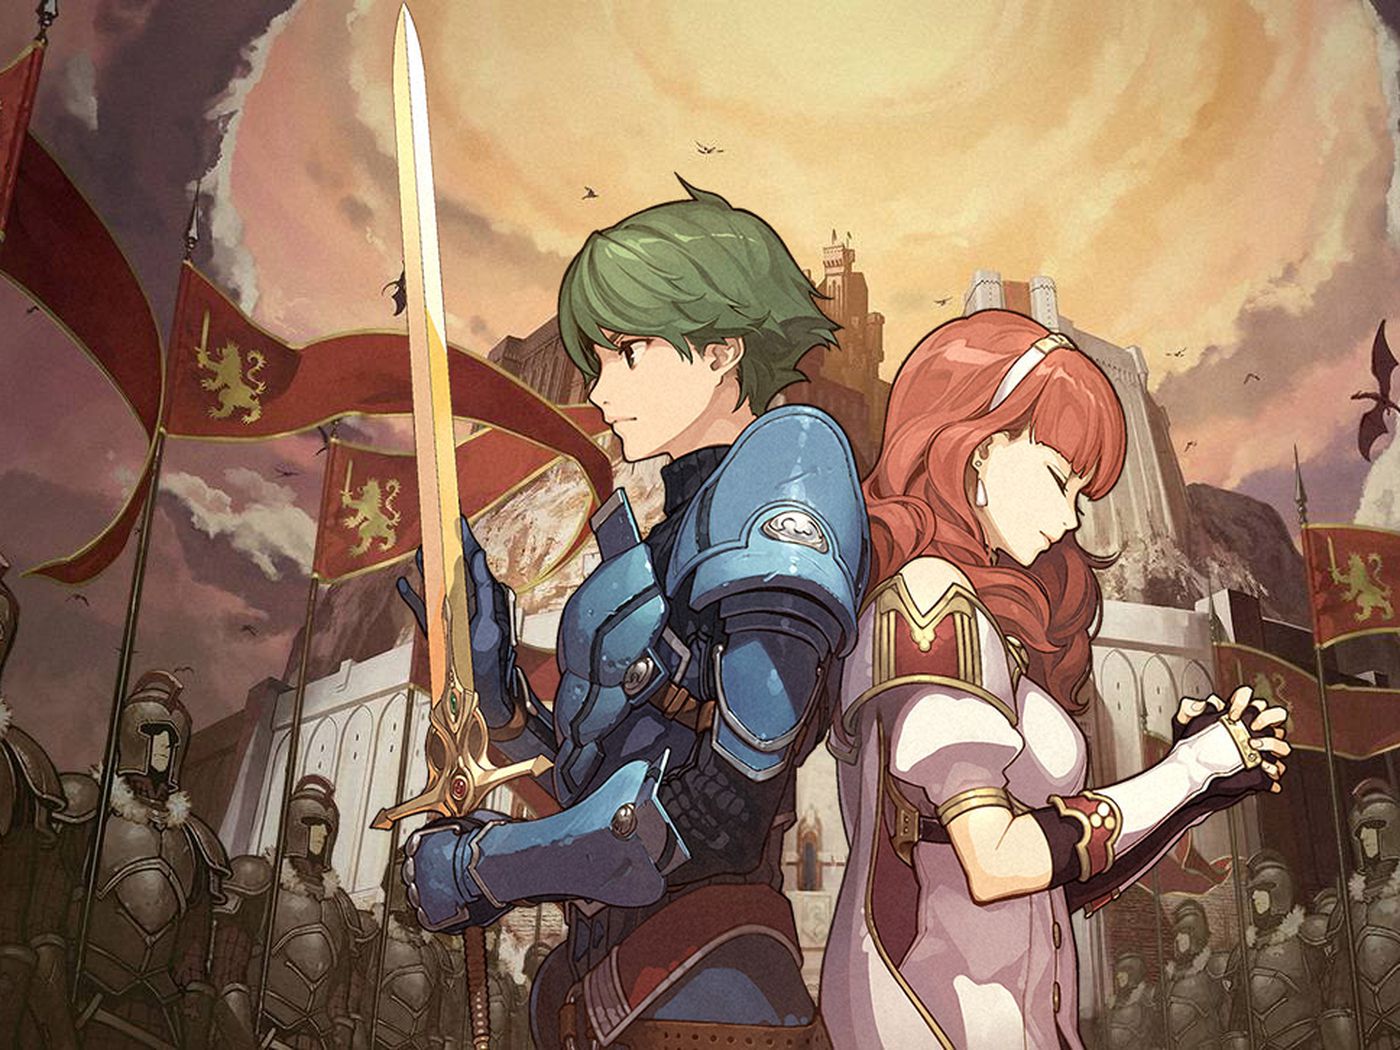 Fire Emblem Echoes: Shadows of Valentia Wallpapers